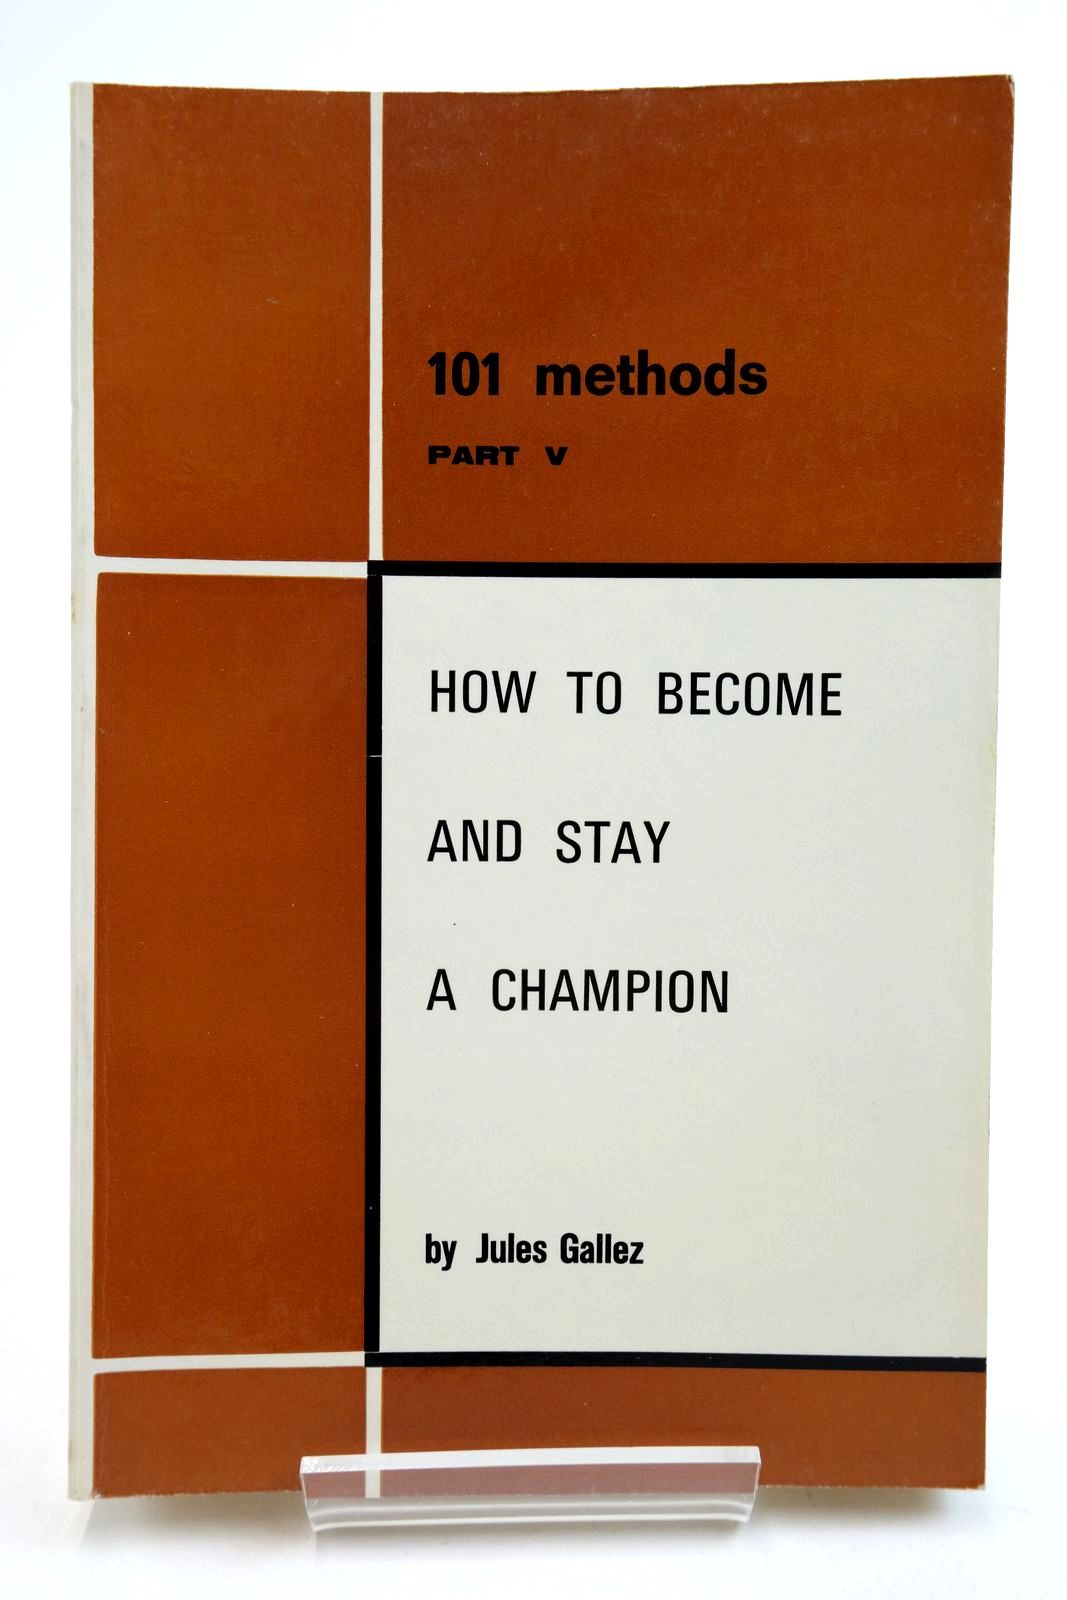 Photo of 101 METHODS PART V HOW TO BECOME AND STAY A CHAMPION written by Gallez, Jules published by De Belgische Duivensport (STOCK CODE: 2134811)  for sale by Stella & Rose's Books